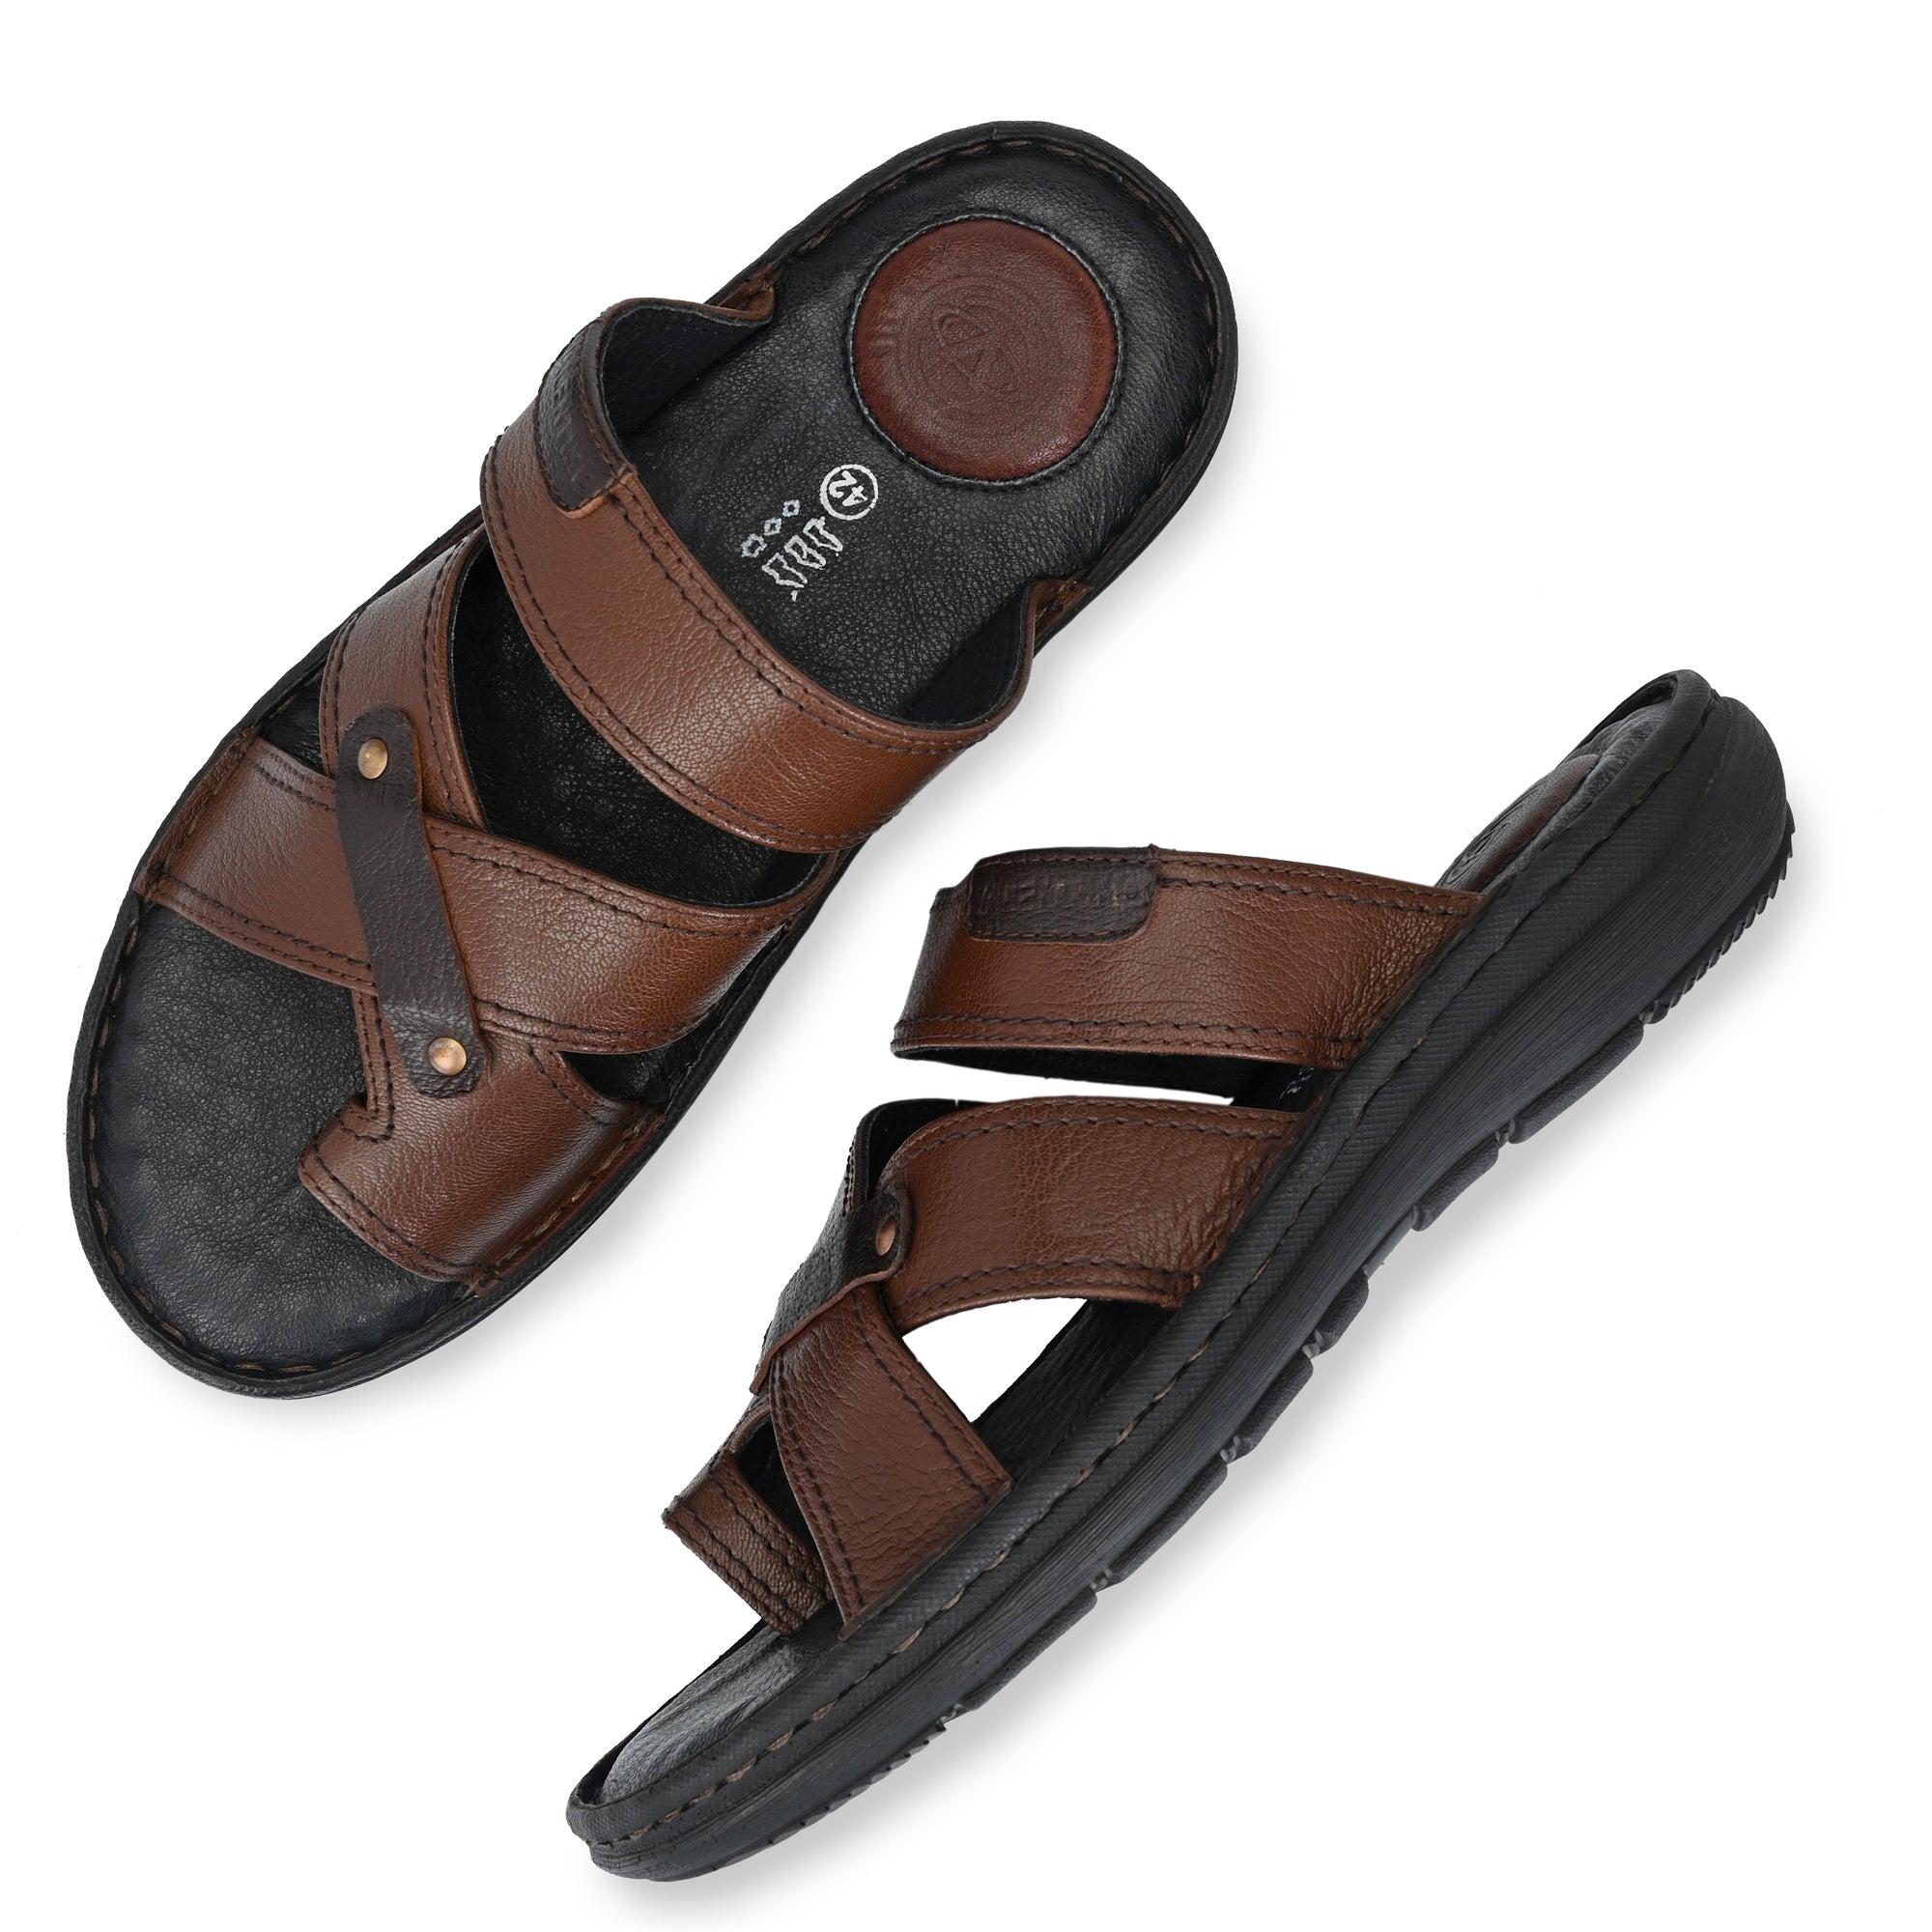 CHALLENGE-26 MEN LEATHER MOCCA/CHERRY CASUAL SLIPPER